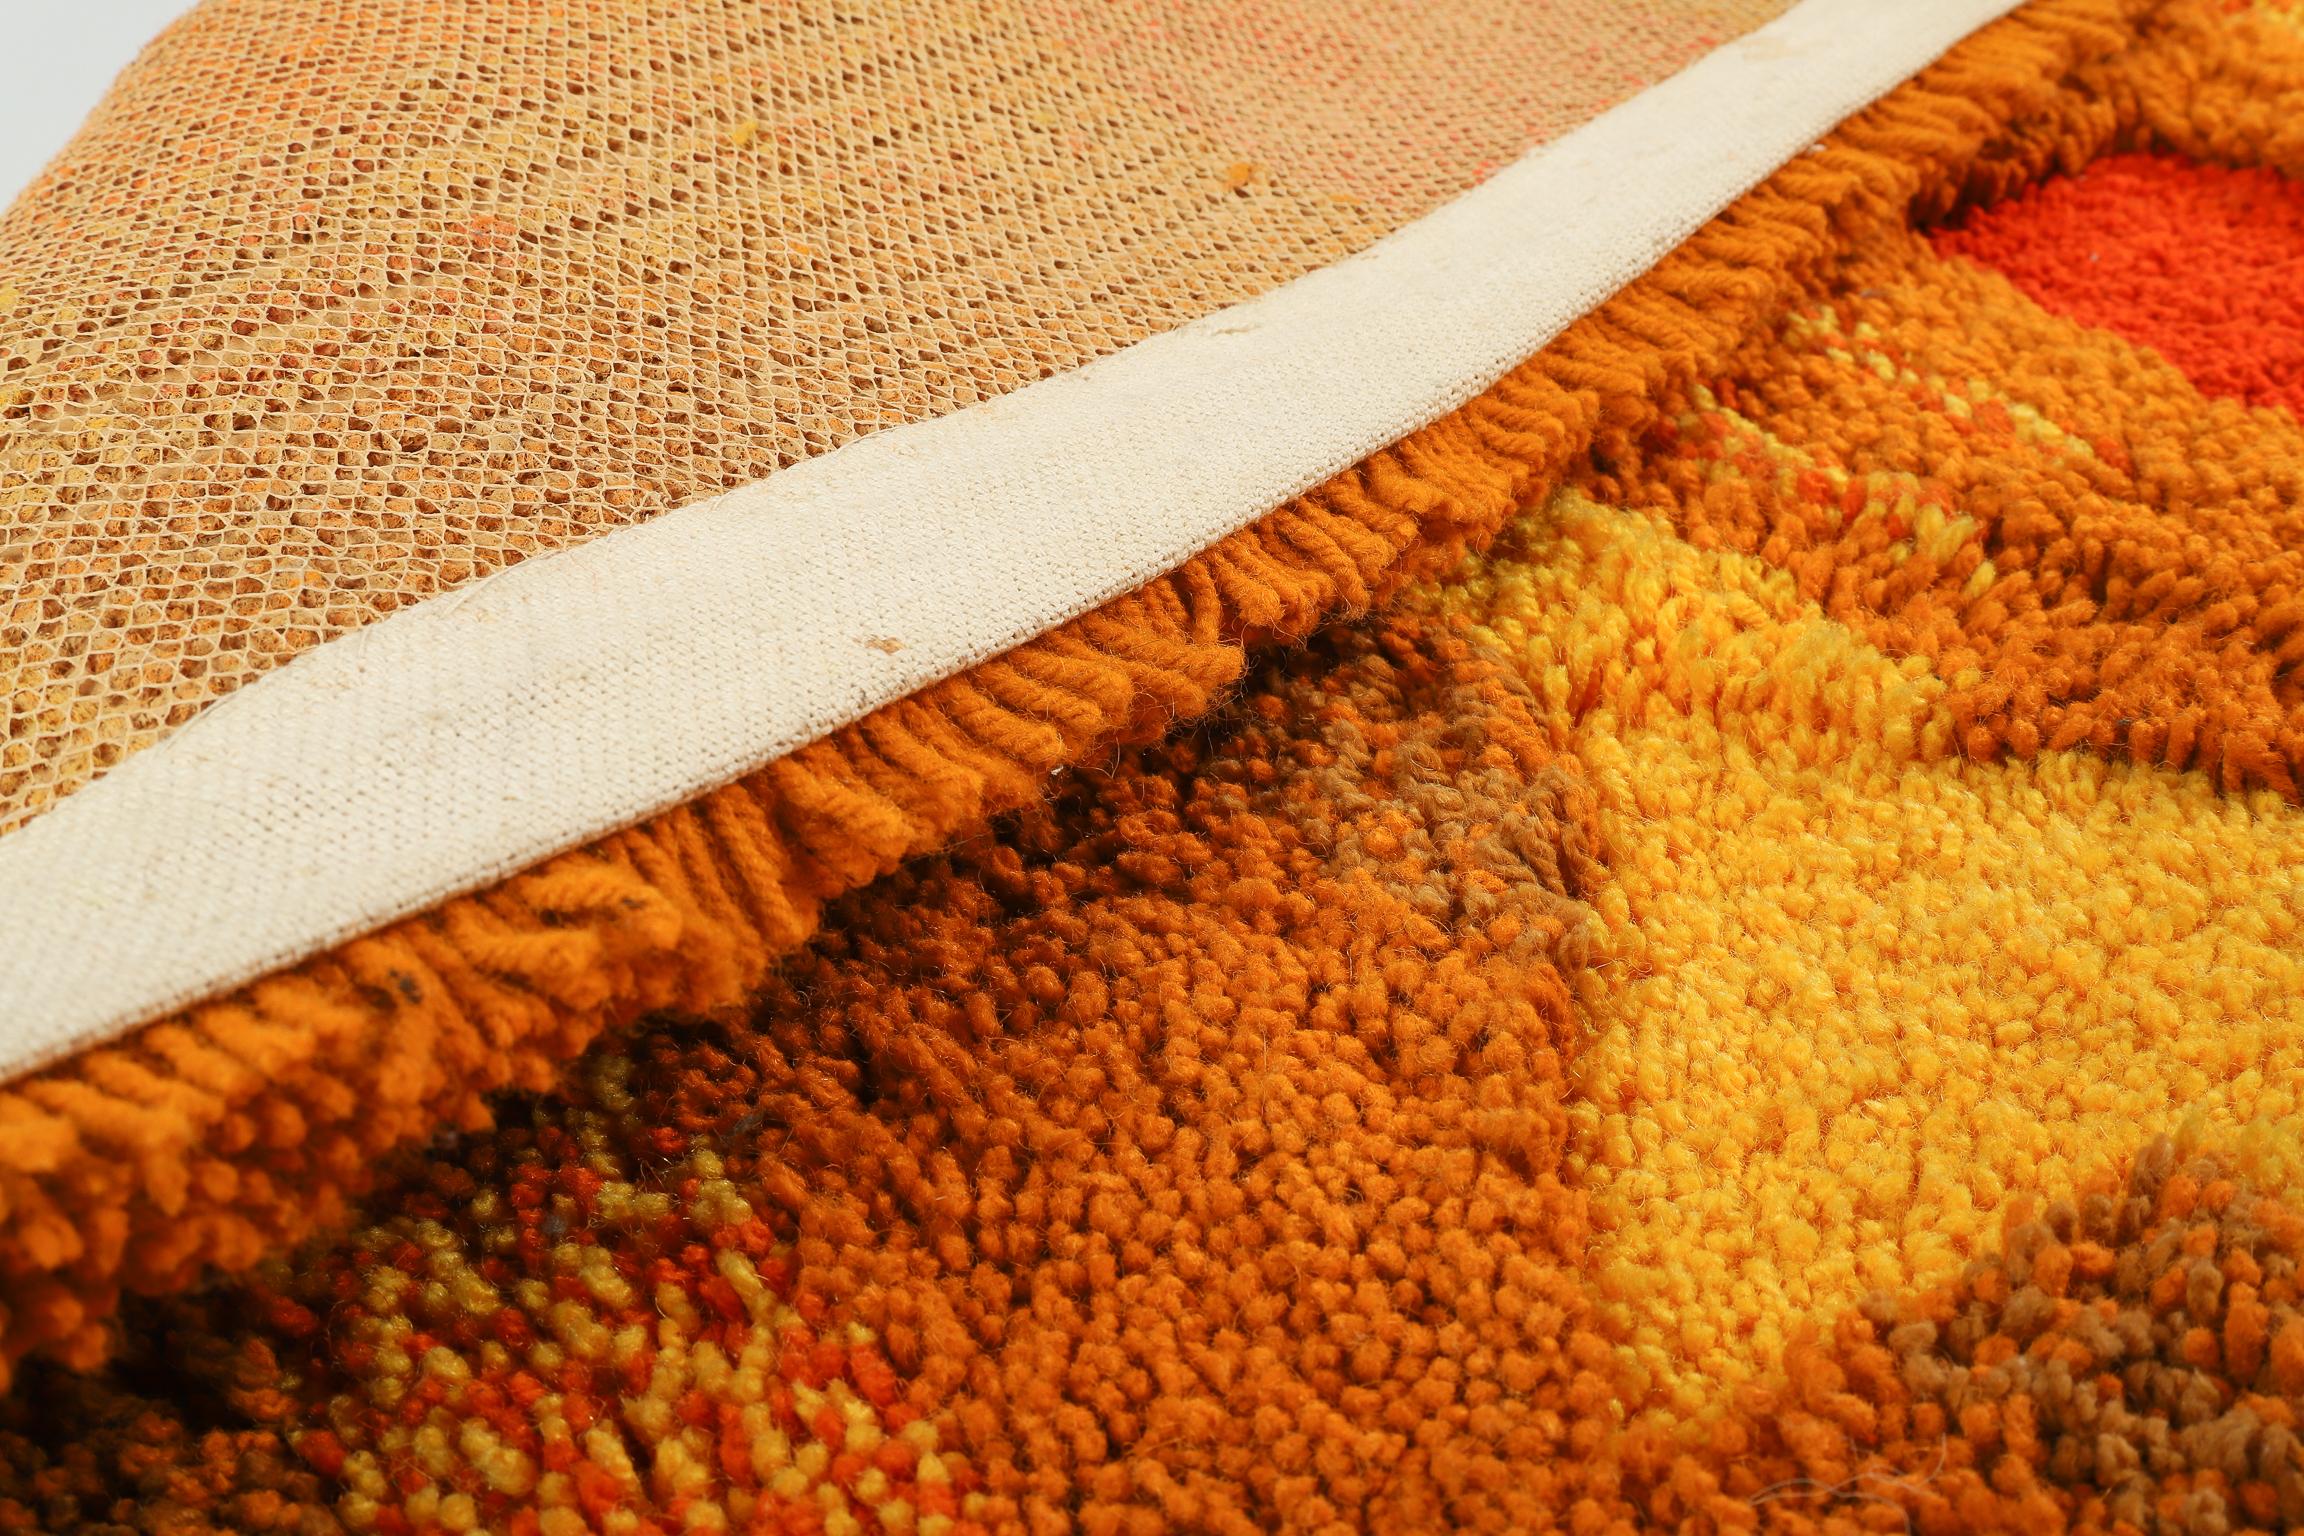 Orange and Yellow Op Pop Mod Woven Tapestry or Rug In Good Condition For Sale In Ferndale, MI